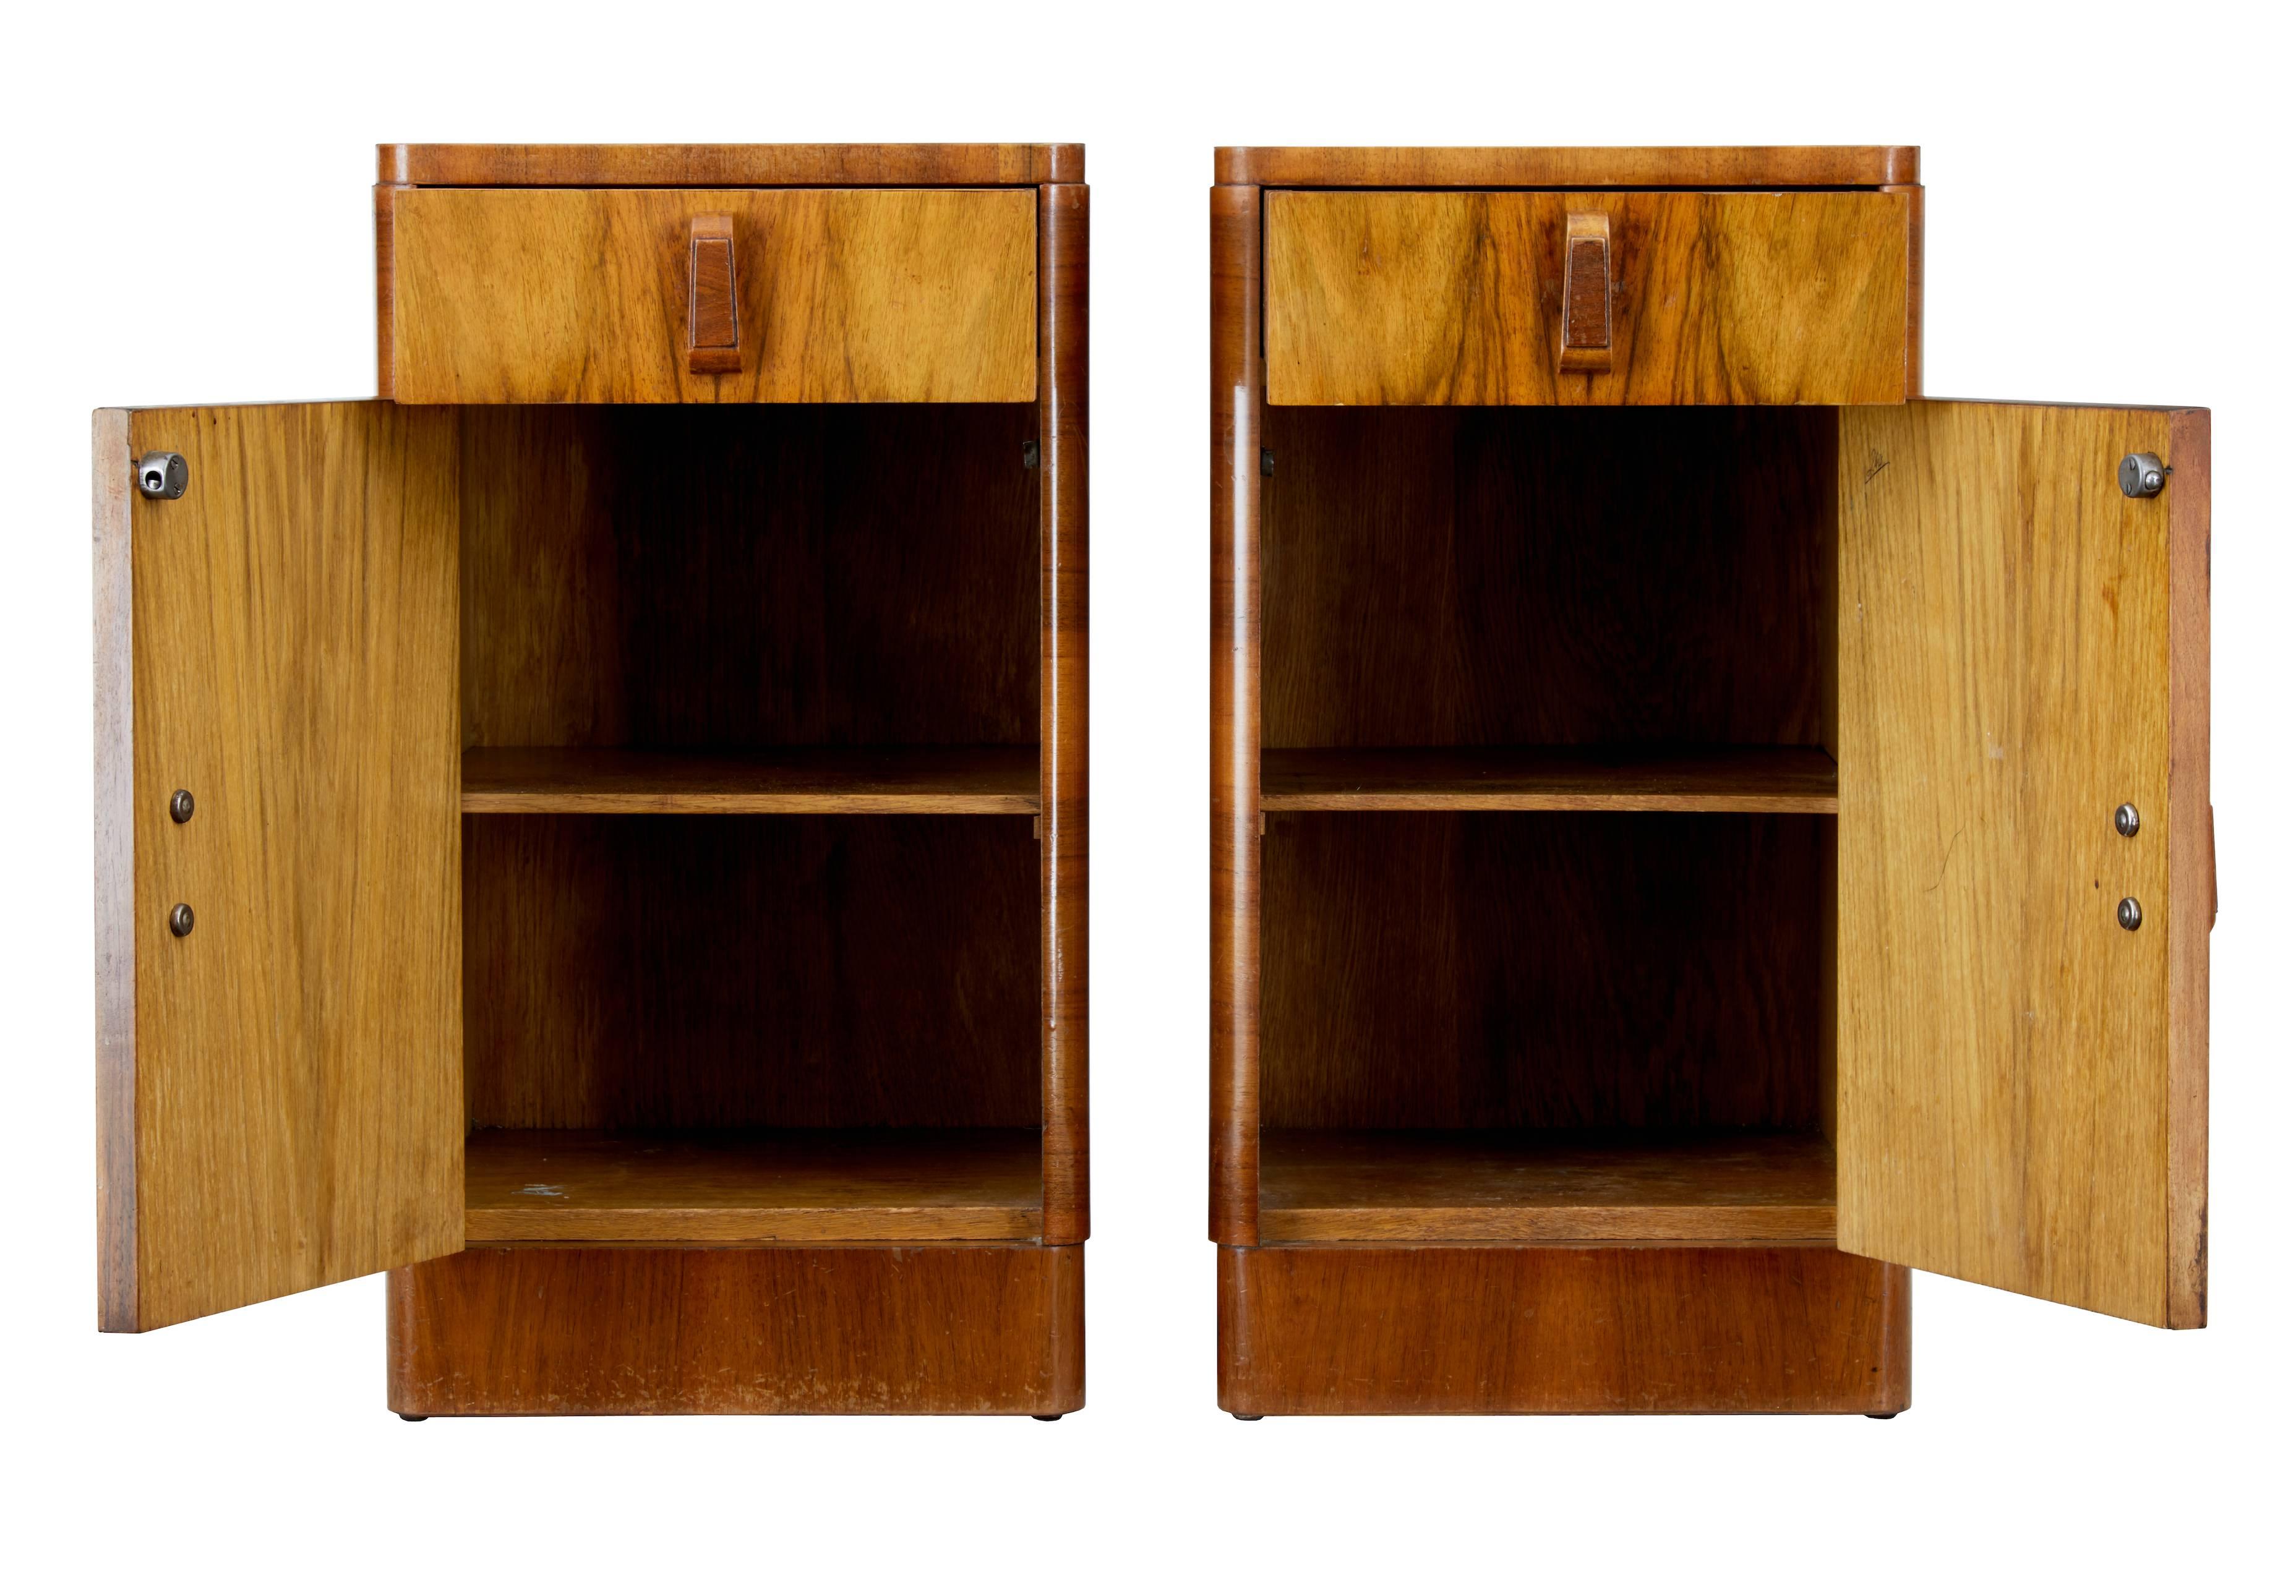 Elegant pair of Art Deco bedside cupboards.
Beautiful figured walnut veneers with quarter veneer top creating a stunning pattern to the top.
Single drawer with single door below containing a single shelf.
Standing on brass studs.
Minor surface